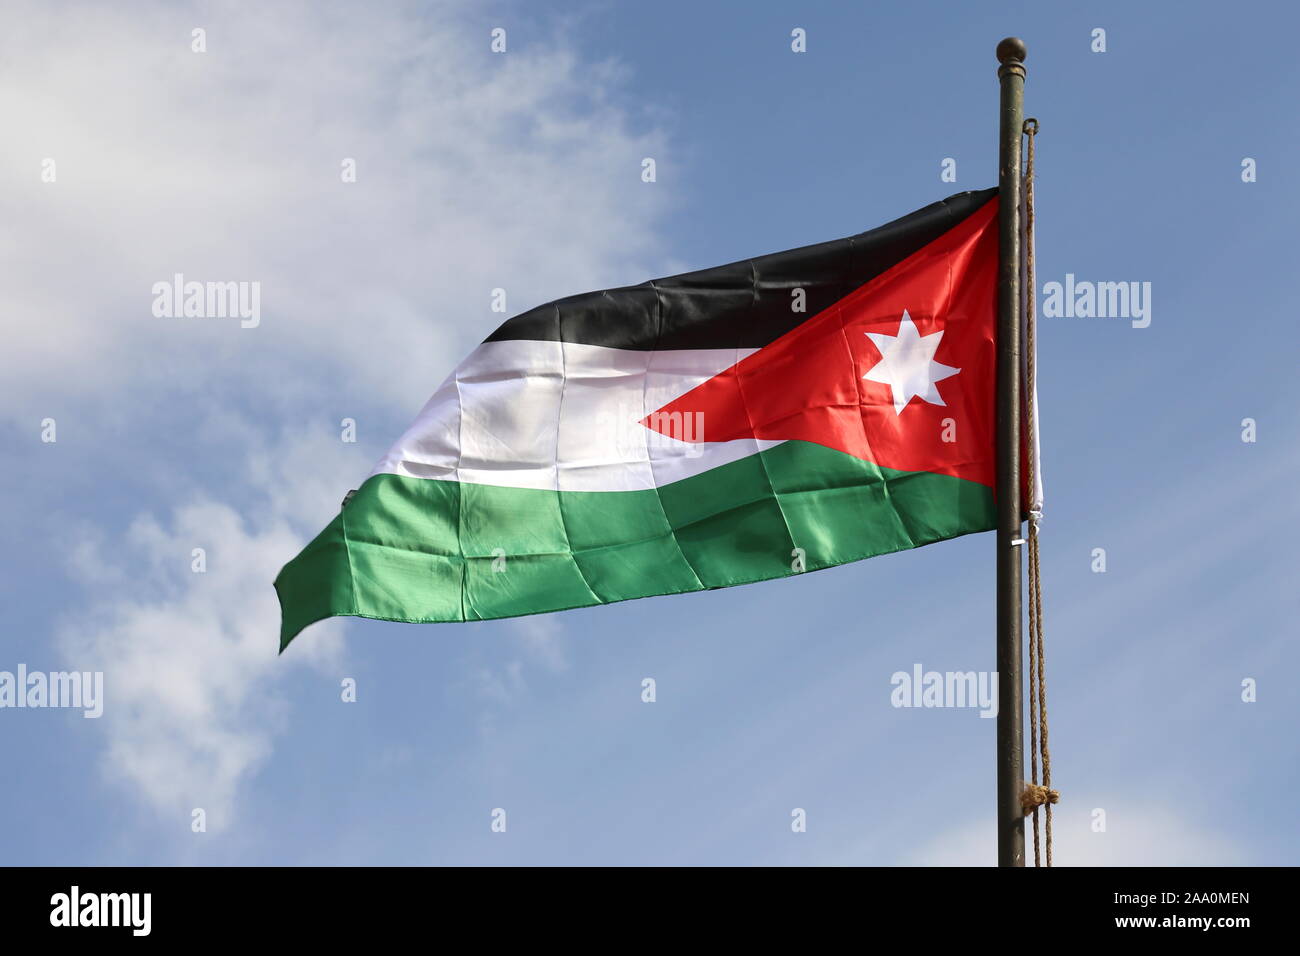 Jordanian flag, Visitor Centre, Wadi Rum Protected Area, Aqaba Governorate, Jordan, Middle East Stock Photo